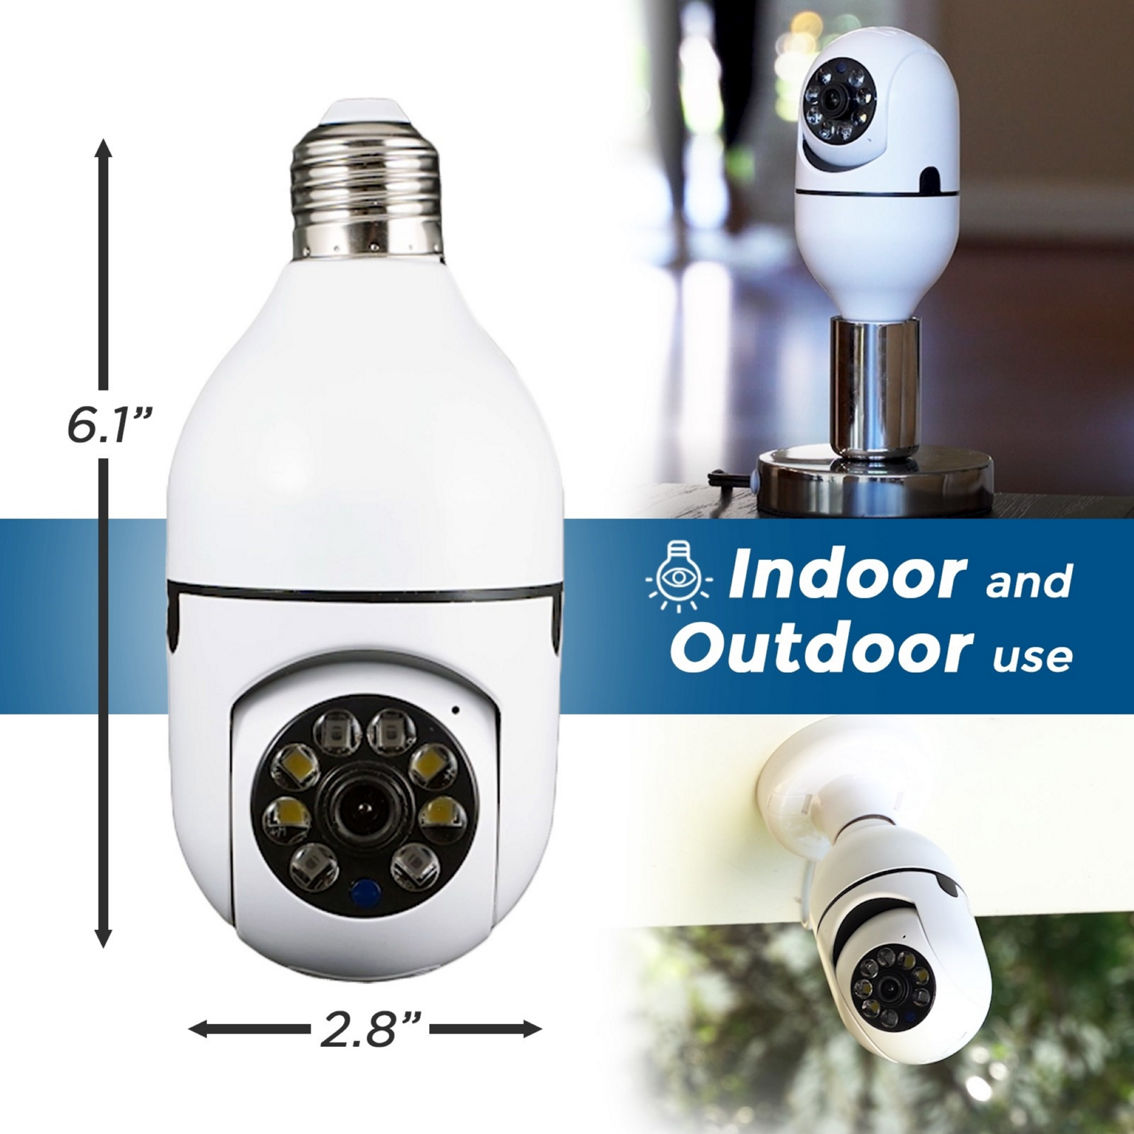 Trend Makers Sight Bulb WiFi Smart Camera Home Security System As Seen On TV - Image 6 of 7